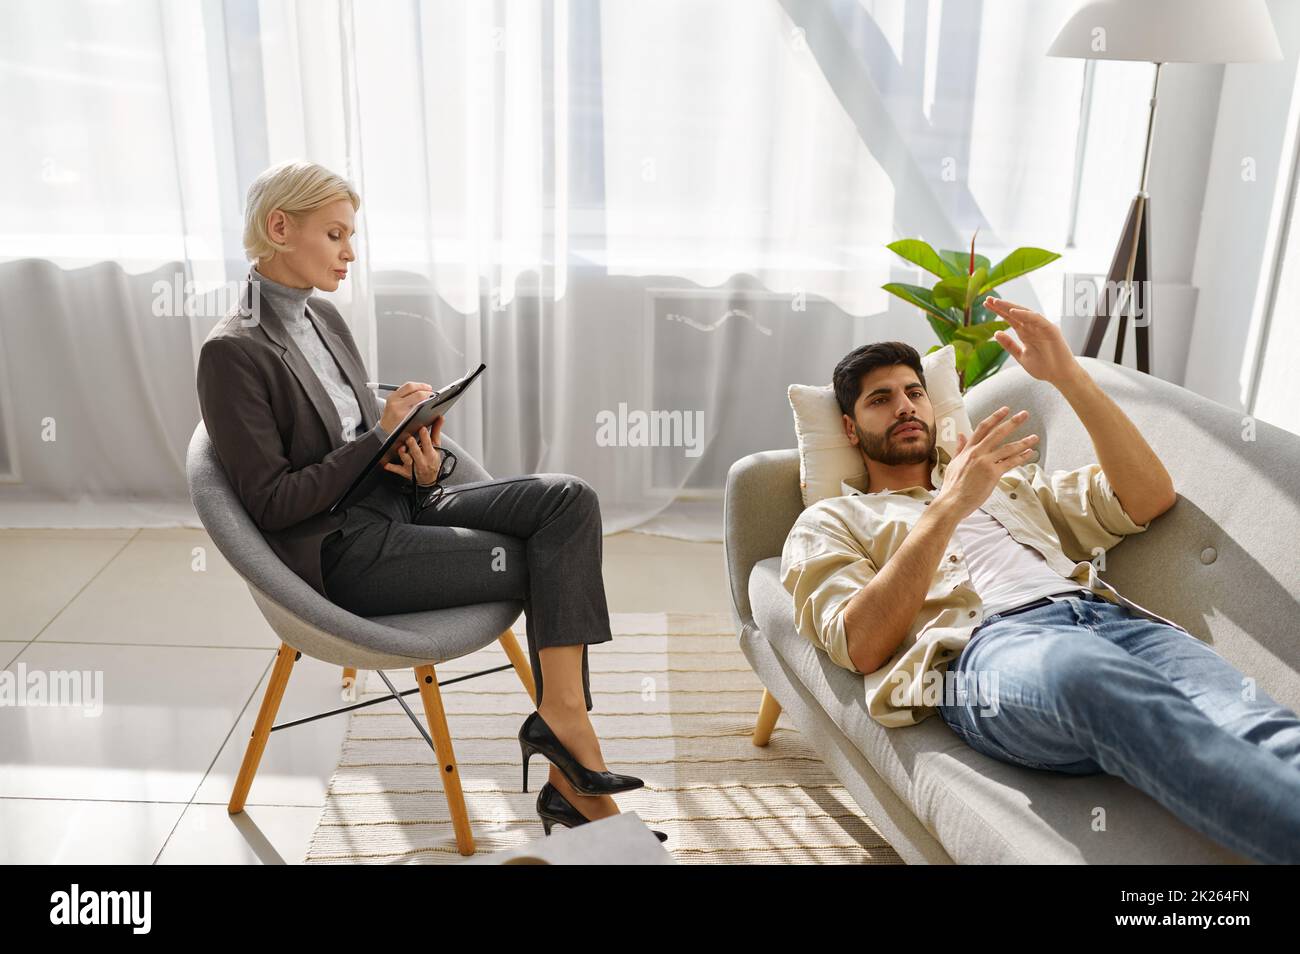 Female psychologist working with man on couch Stock Photo